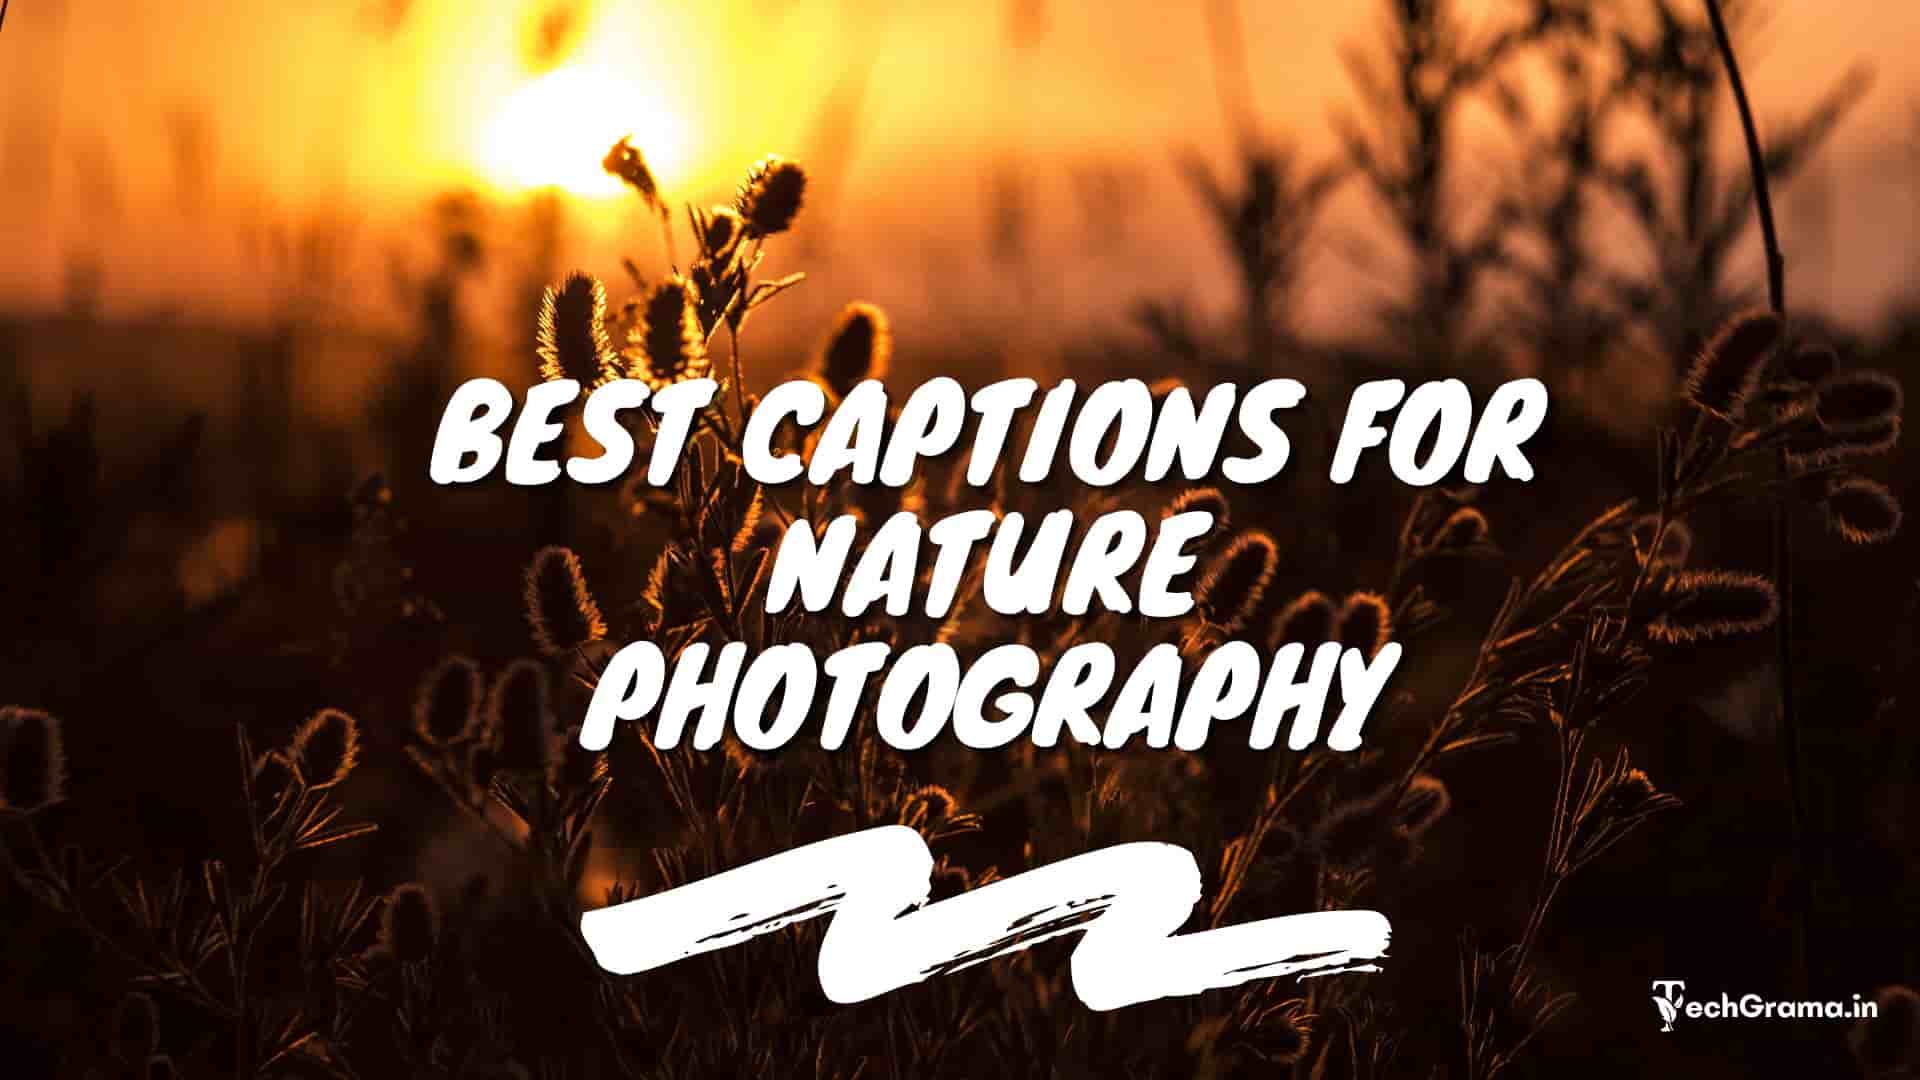 Best Captions For Nature Photography, Quotes About Nature Photography, Captions For Nature Photos On Instagram, One Word Caption For Nature Photography, Instagram Captions For Nature Photography, Short Nature Captions For Instagram, Nature Photography Captions For Instagram.